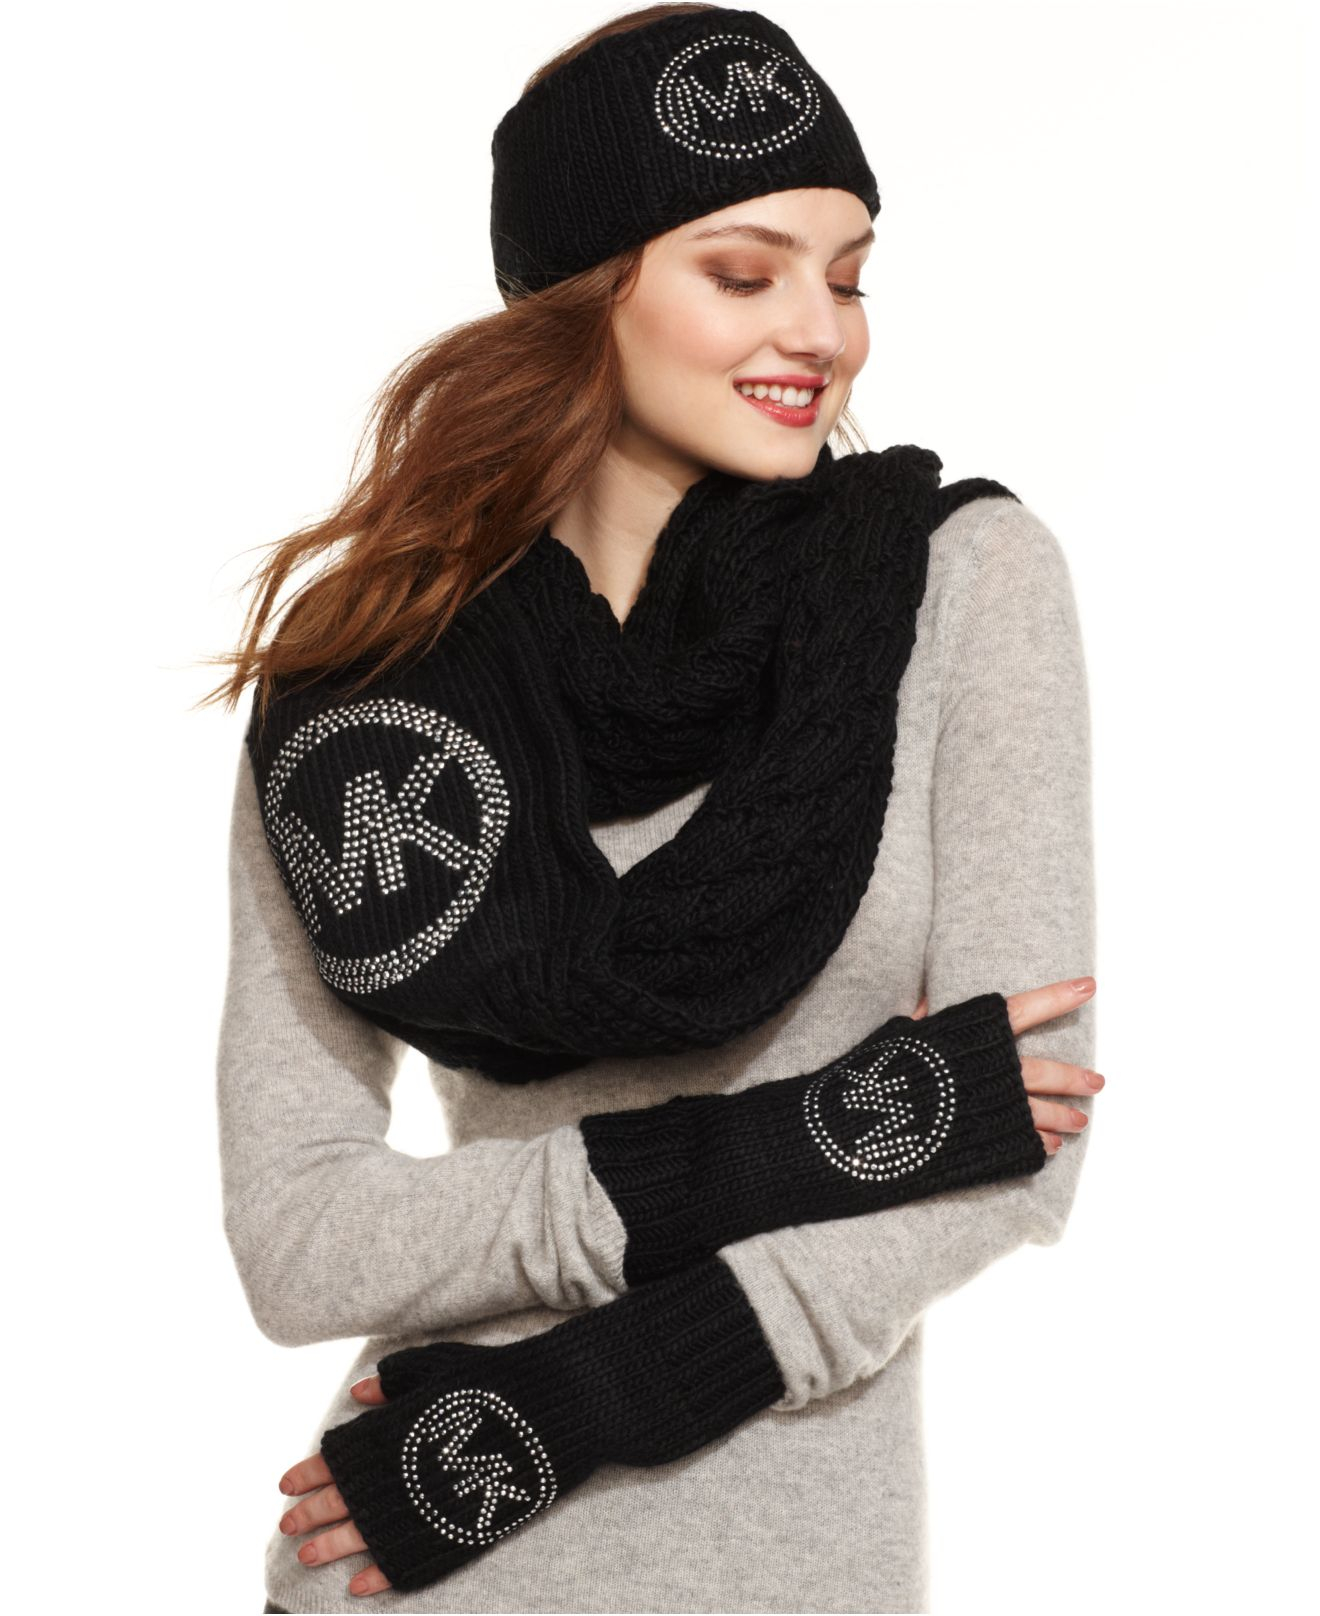 michael kors womens hat and scarf set